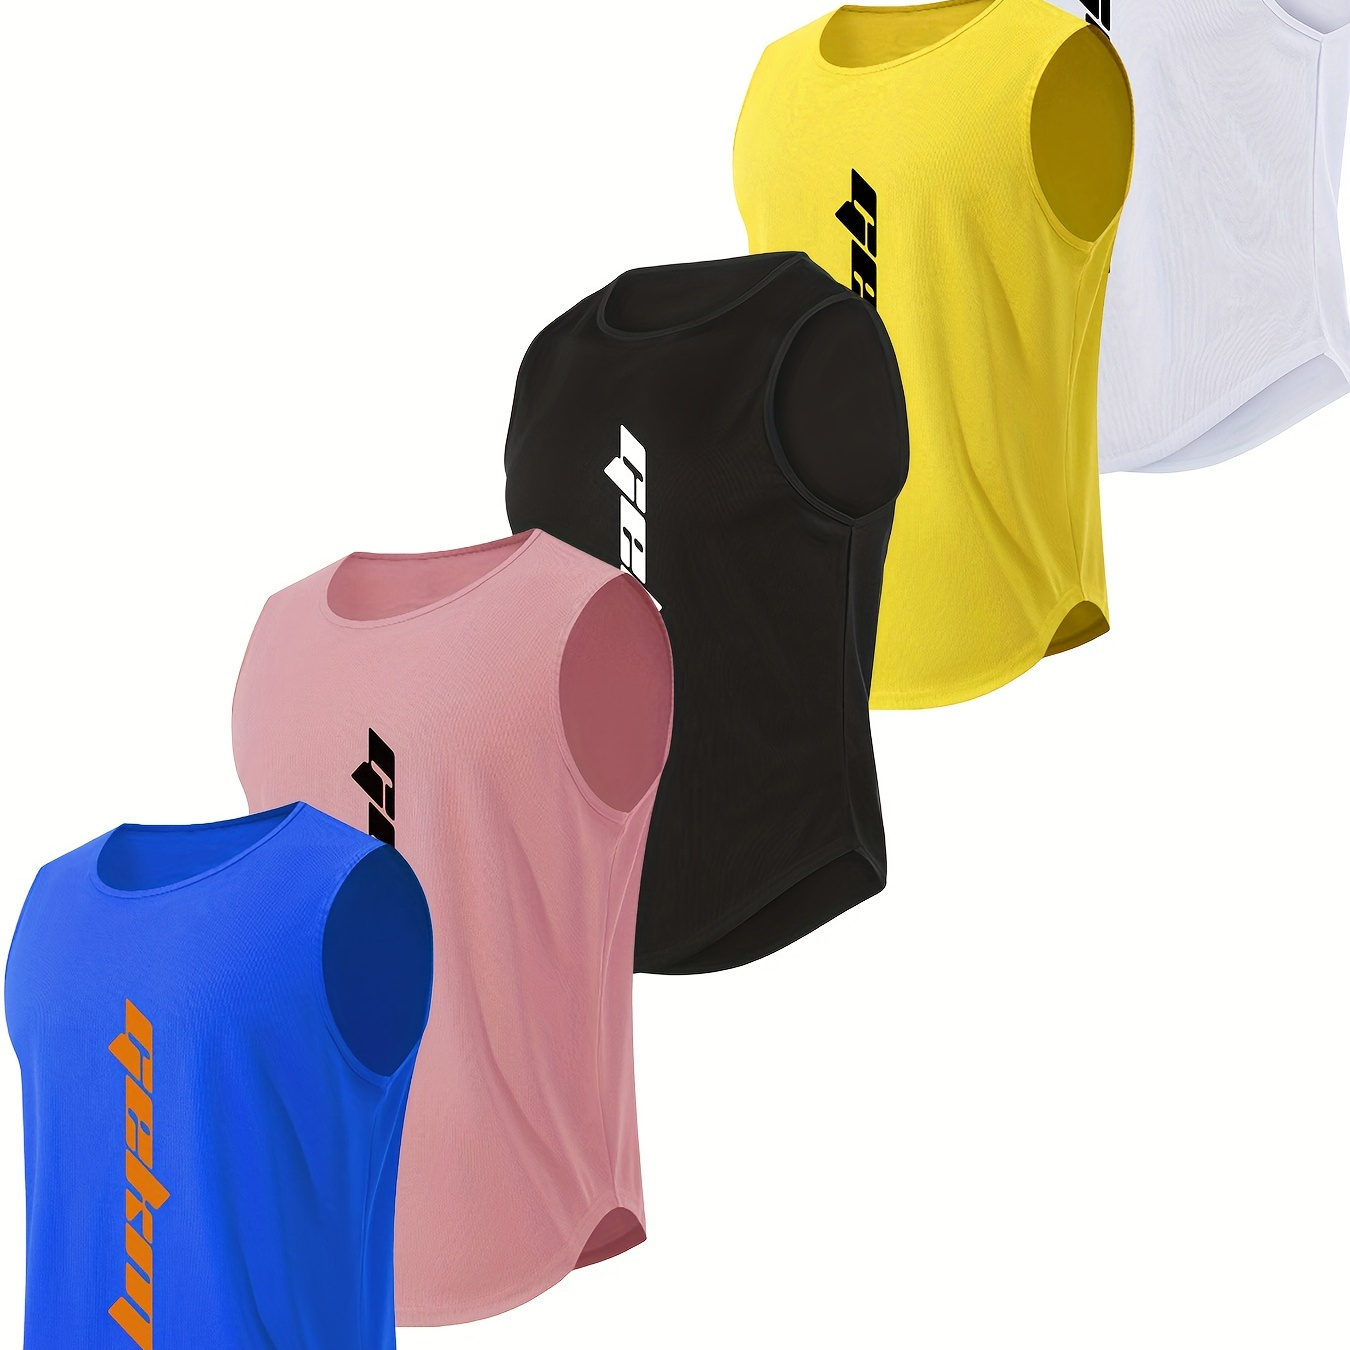 

5pcs Summer Men's Quick Dry Moisture-wicking Breathable Tank Tops, Athletic Gym Bodybuilding Sports Sleeveless Shirts, For Running Training, Men's Clothing